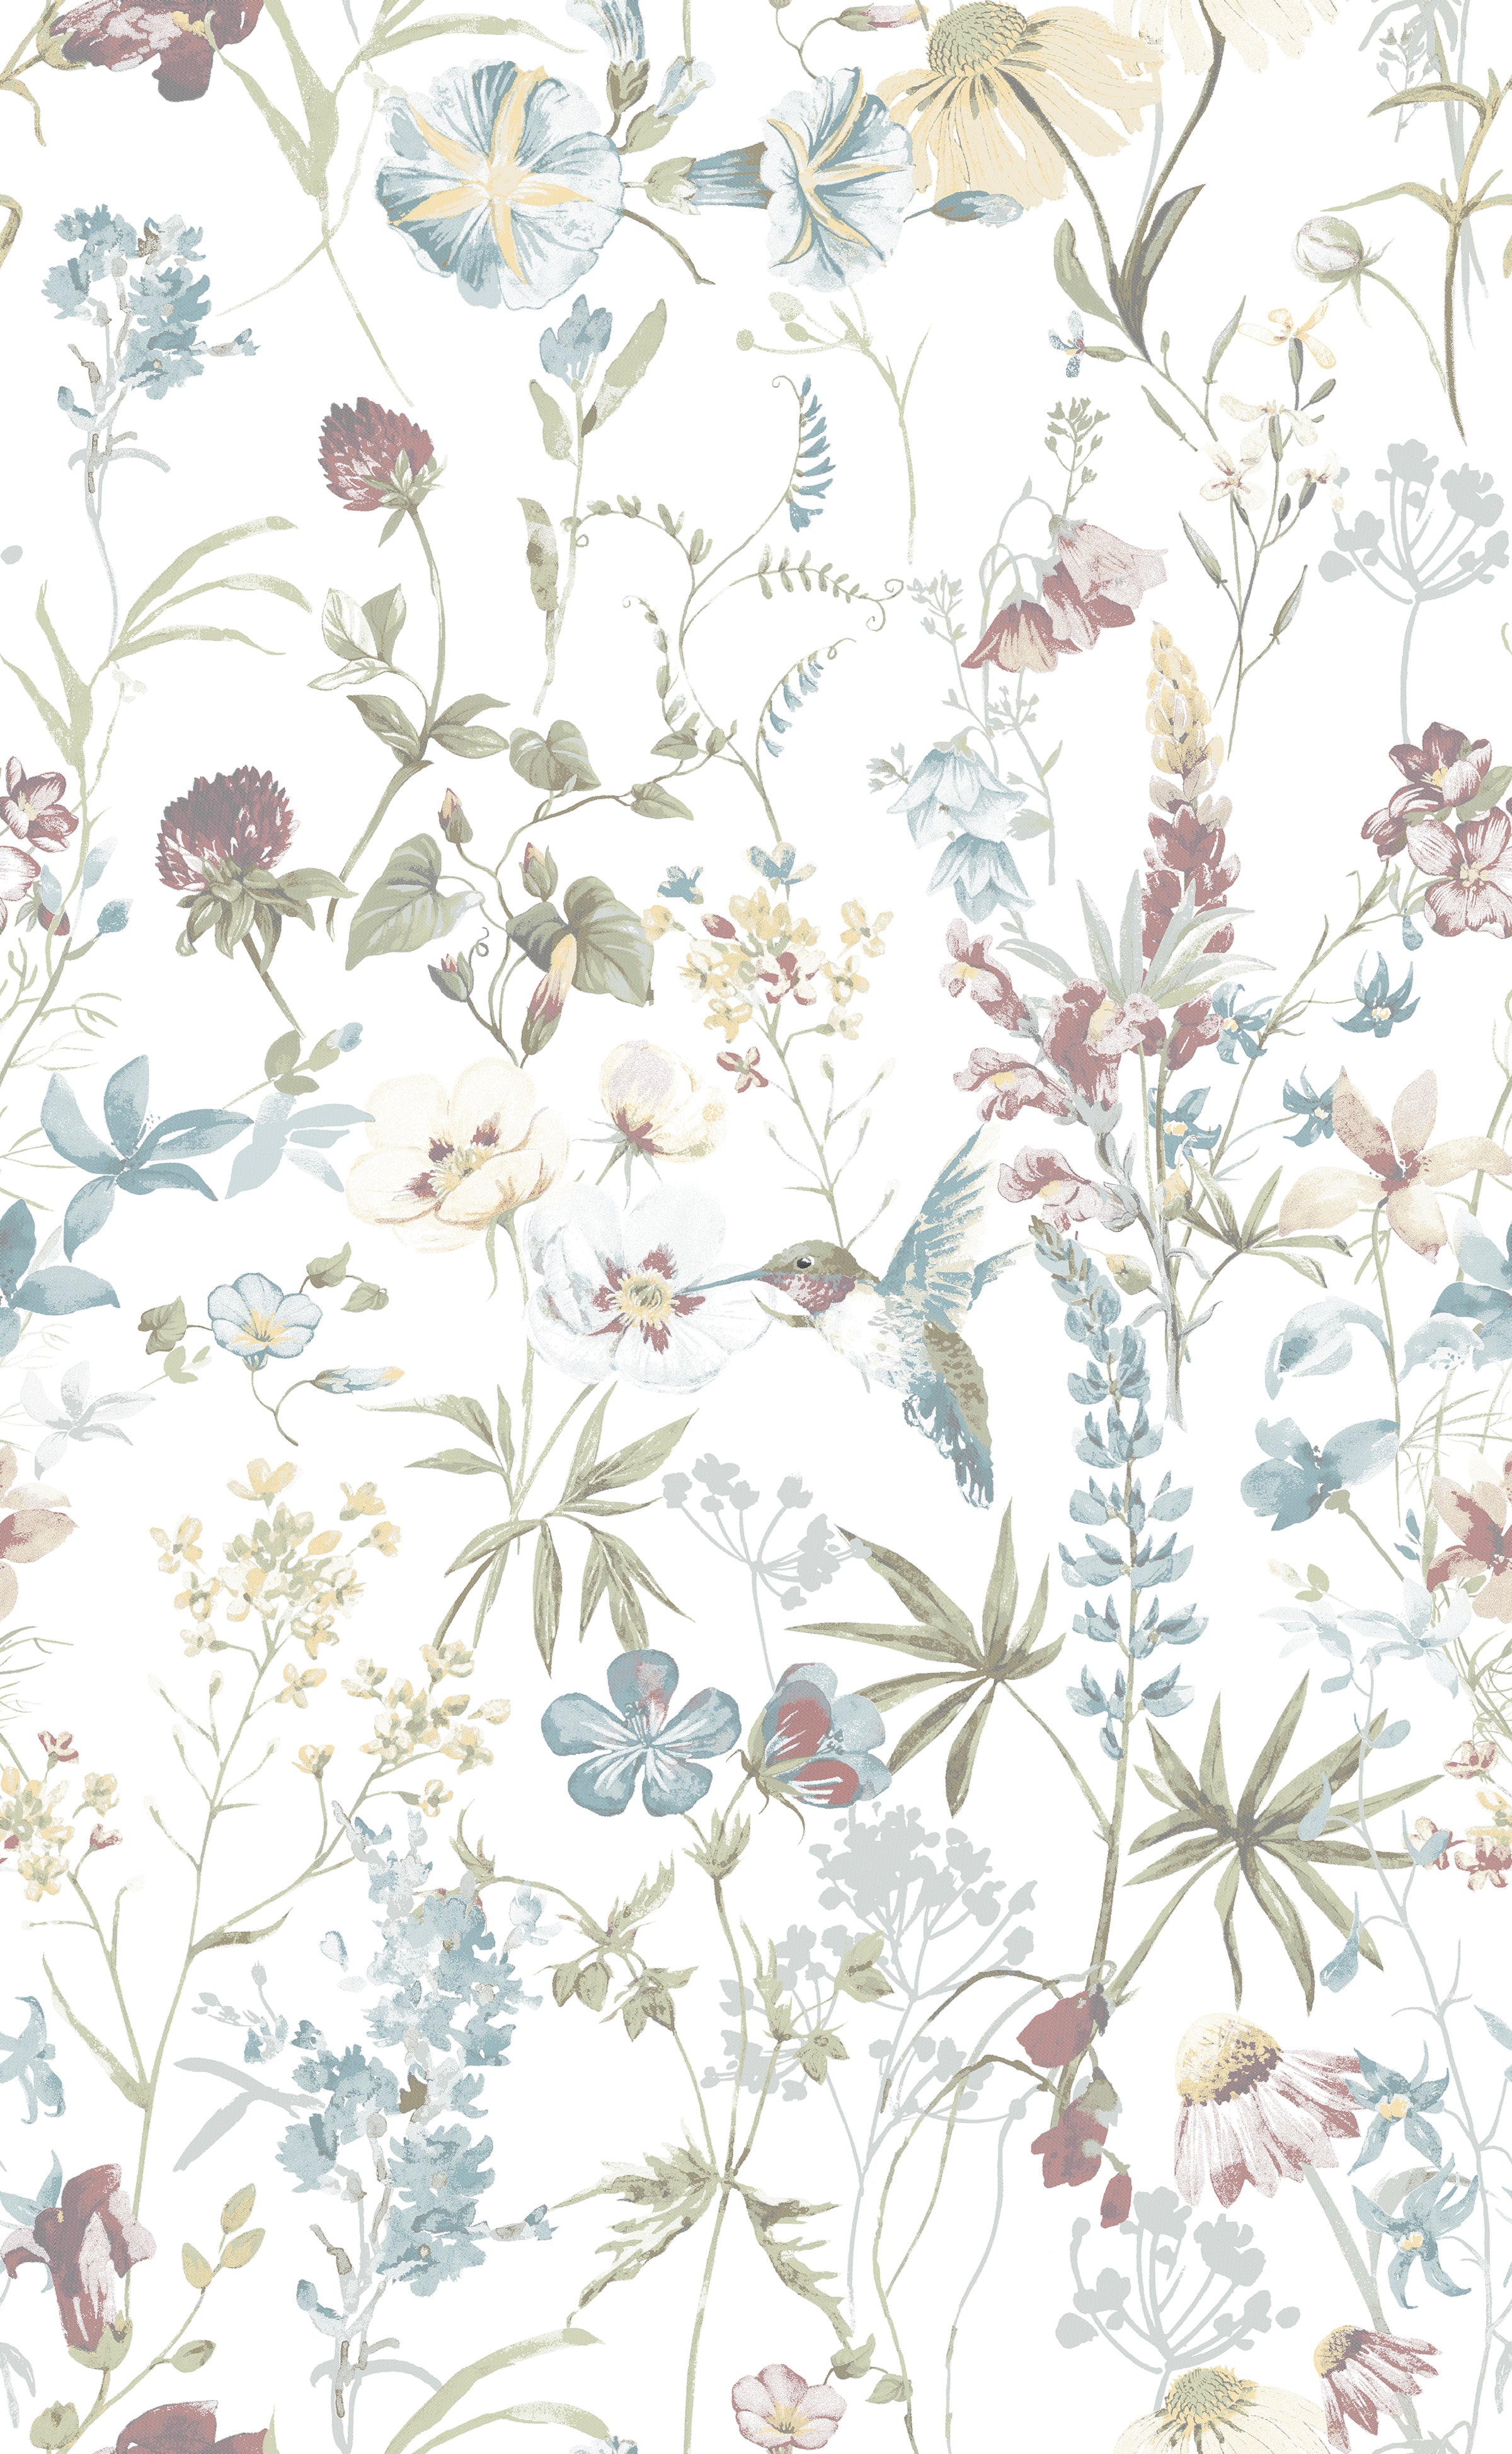 A detailed view of the Soft Feathered Blooms Wallpaper showcasing its intricate design of various flowers, ferns, and leaves intertwined with graceful birds in flight. The subtle colors and natural motifs create a peaceful and inviting atmosphere.